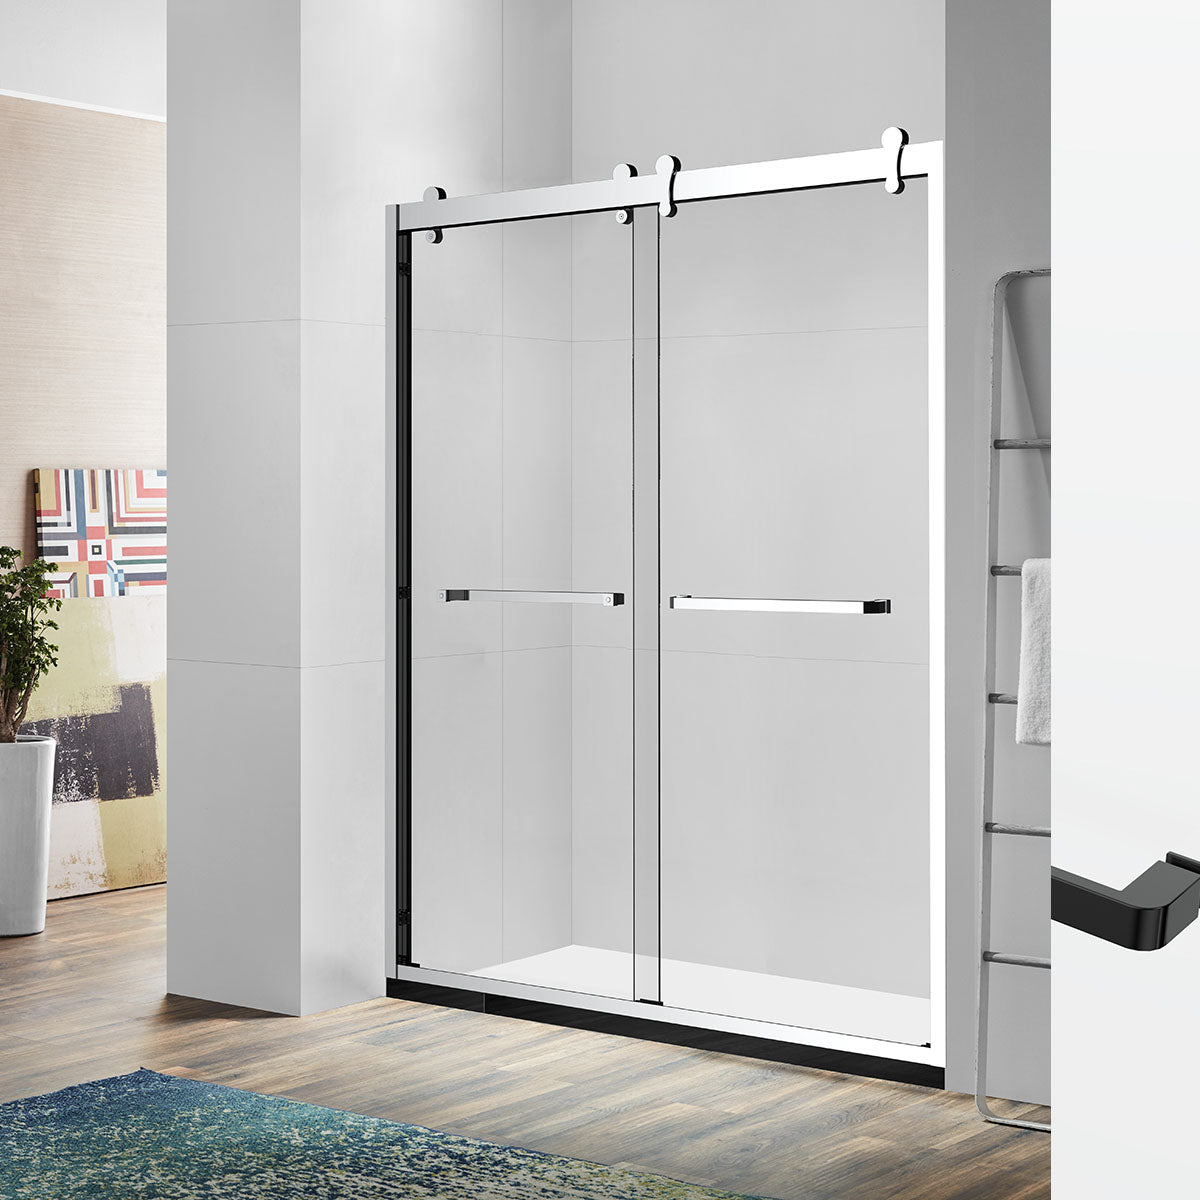 54" GBY22 Owen Bypass Series  Shower Door with Klearteck Treatment (3/8" Thickness) (Chrome)